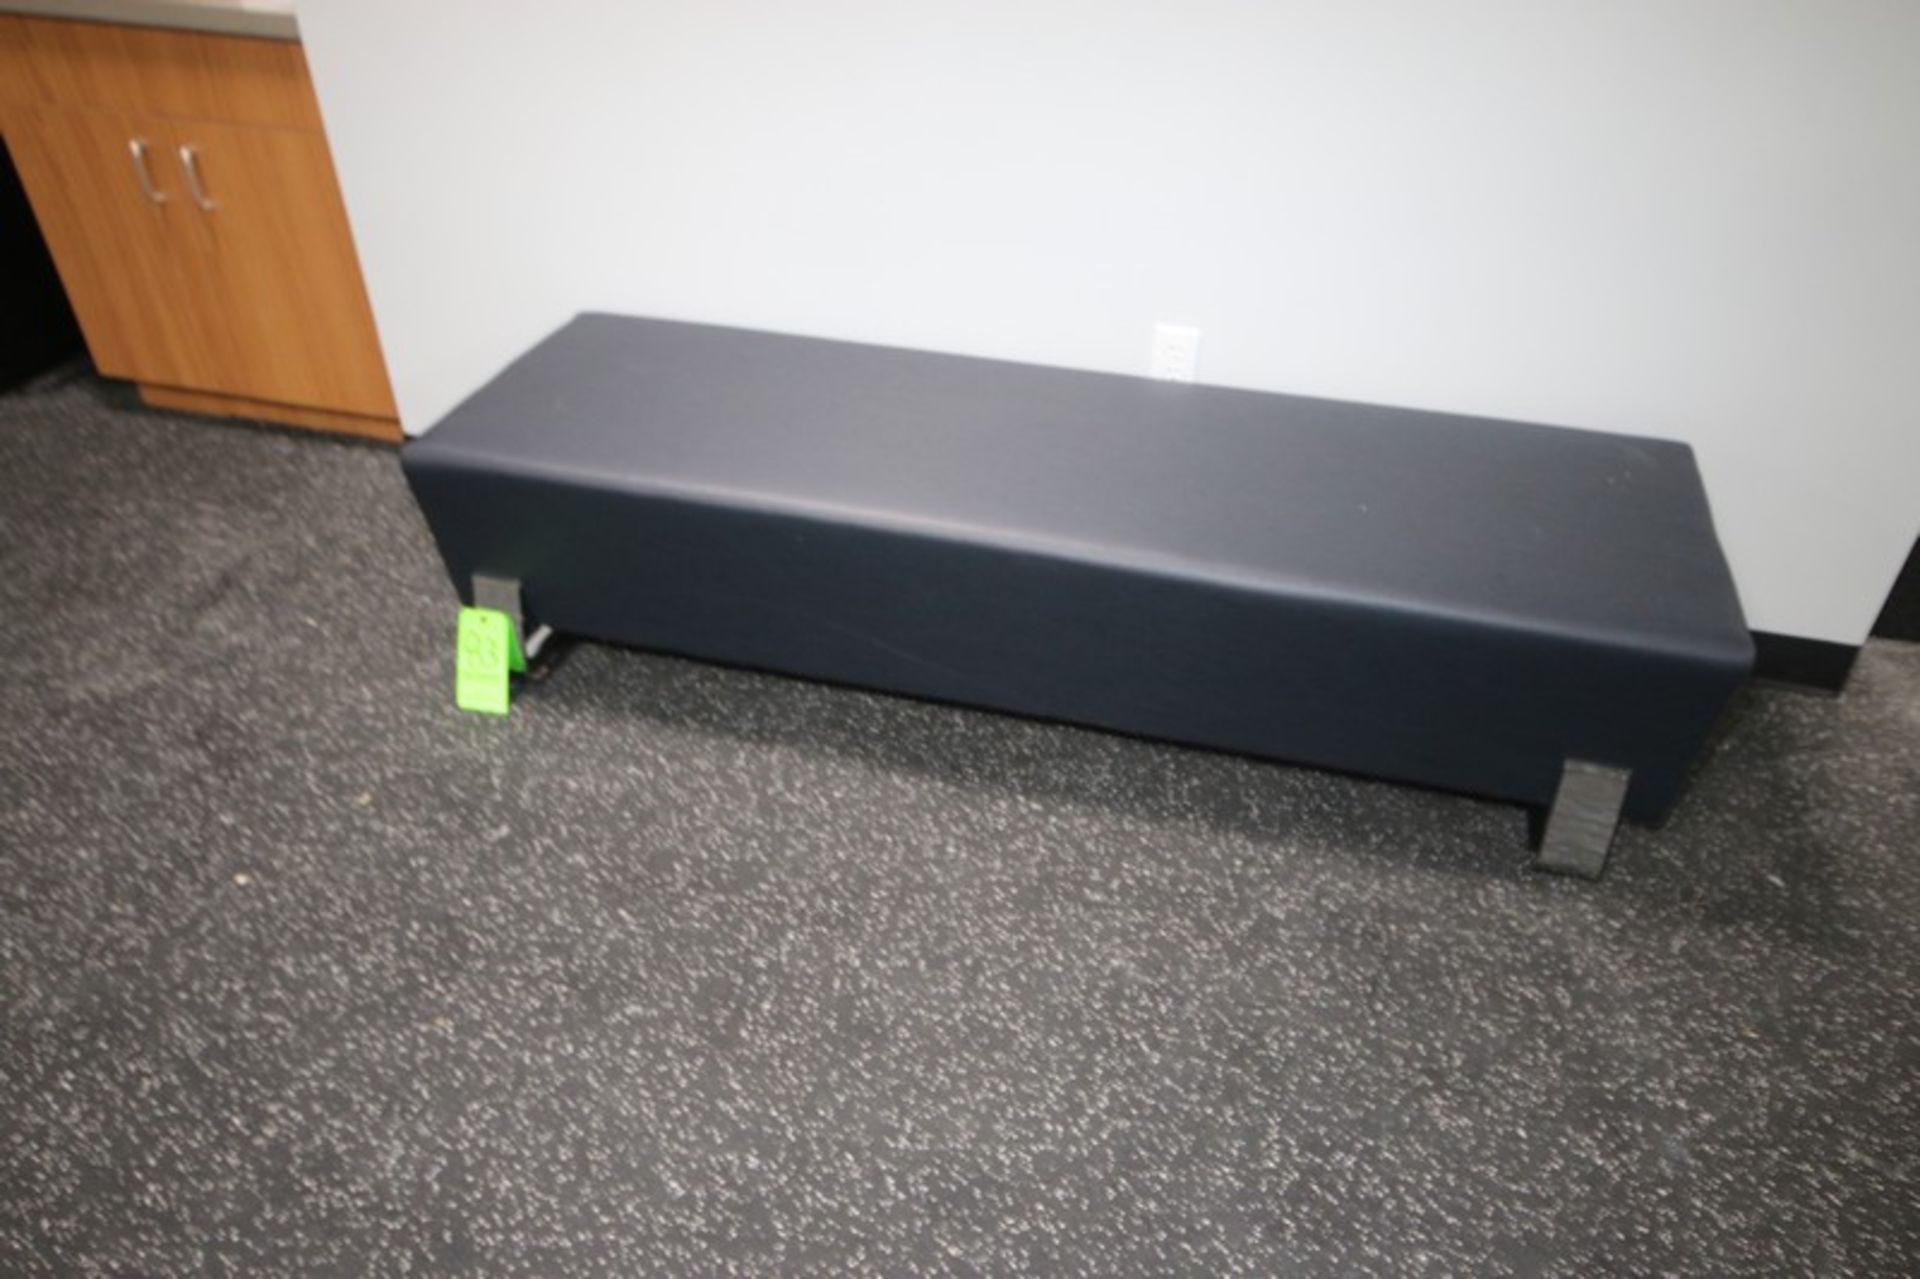 Gym Couch, Aprox. 6' L (LOCATED @ 2806 GOLDEN MILE HWY, ROUTE 286, PITTSBURGH, PA 15239) - Image 2 of 2